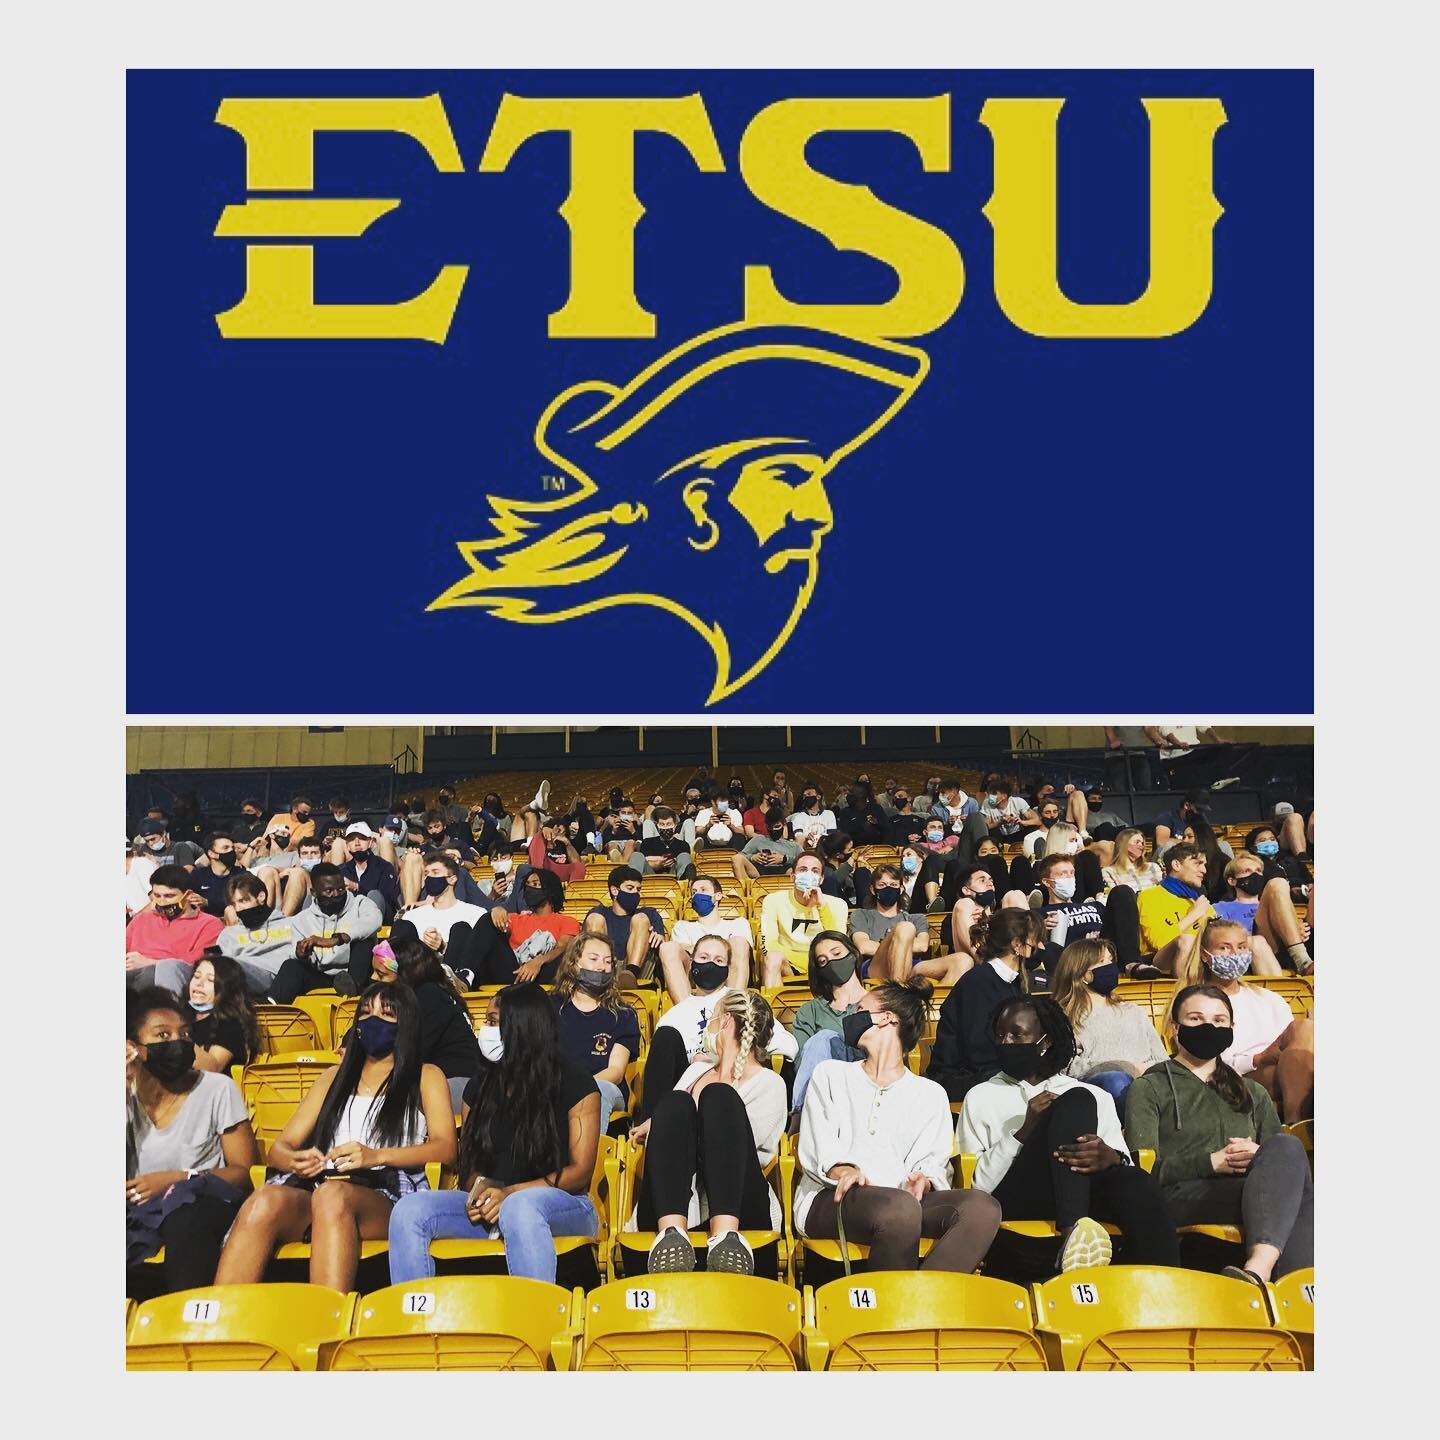 Our first in-person 2021 &ldquo;Tyler Talk&rdquo; Thank you Eastern Tennessee State University for welcoming us, listening and sharing with us after. You are an incredible group, please take care of each other and your physical and mental health. Wis